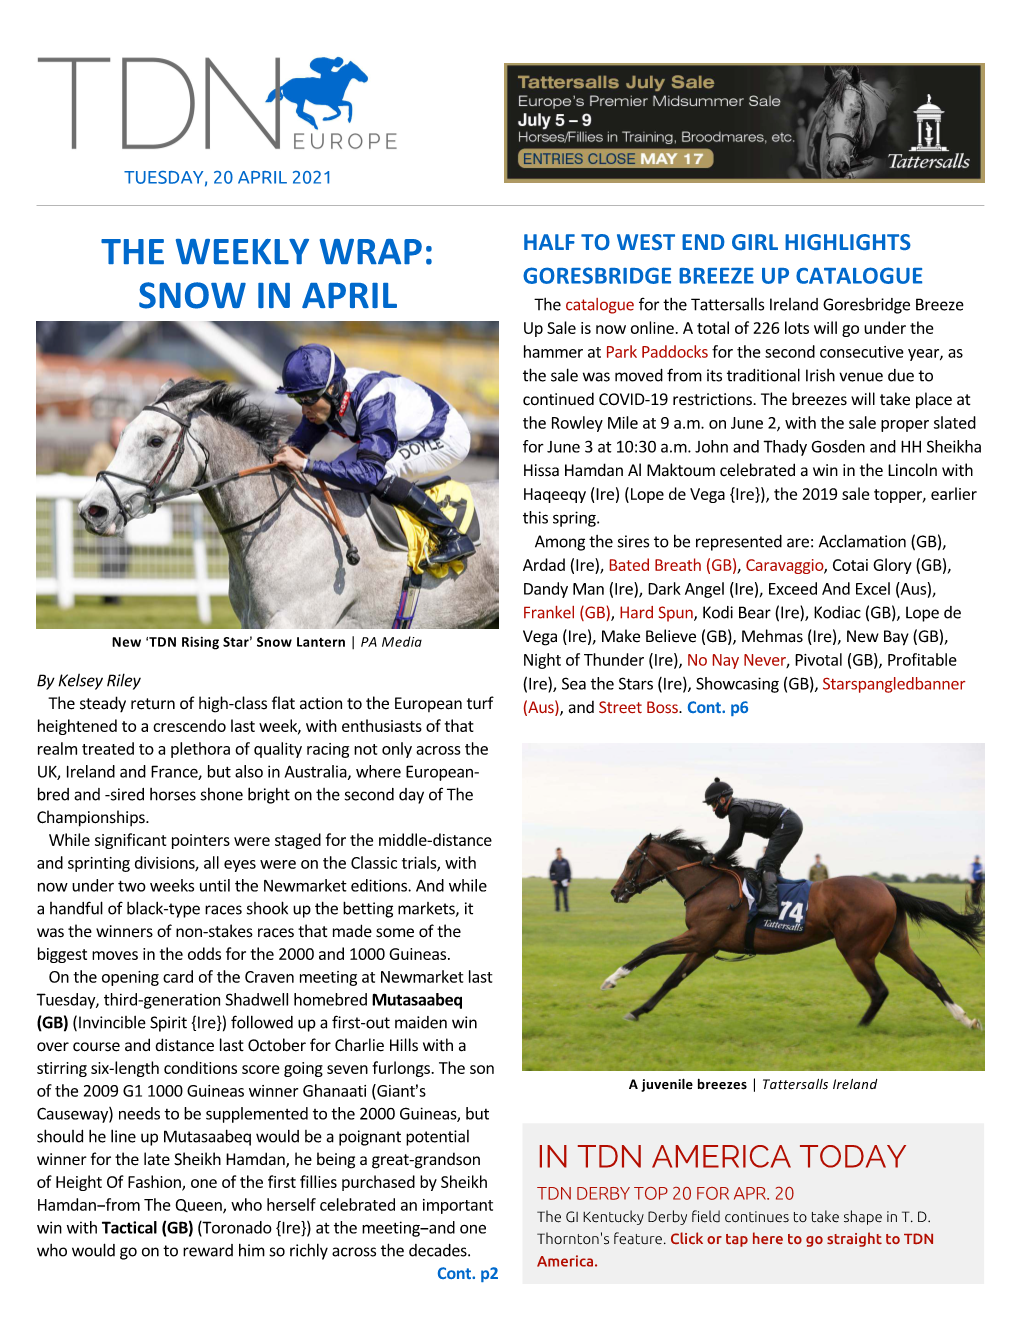 Tdn Europe • Page 2 of 11 • Thetdn.Com Tuesday • 20 April 2021